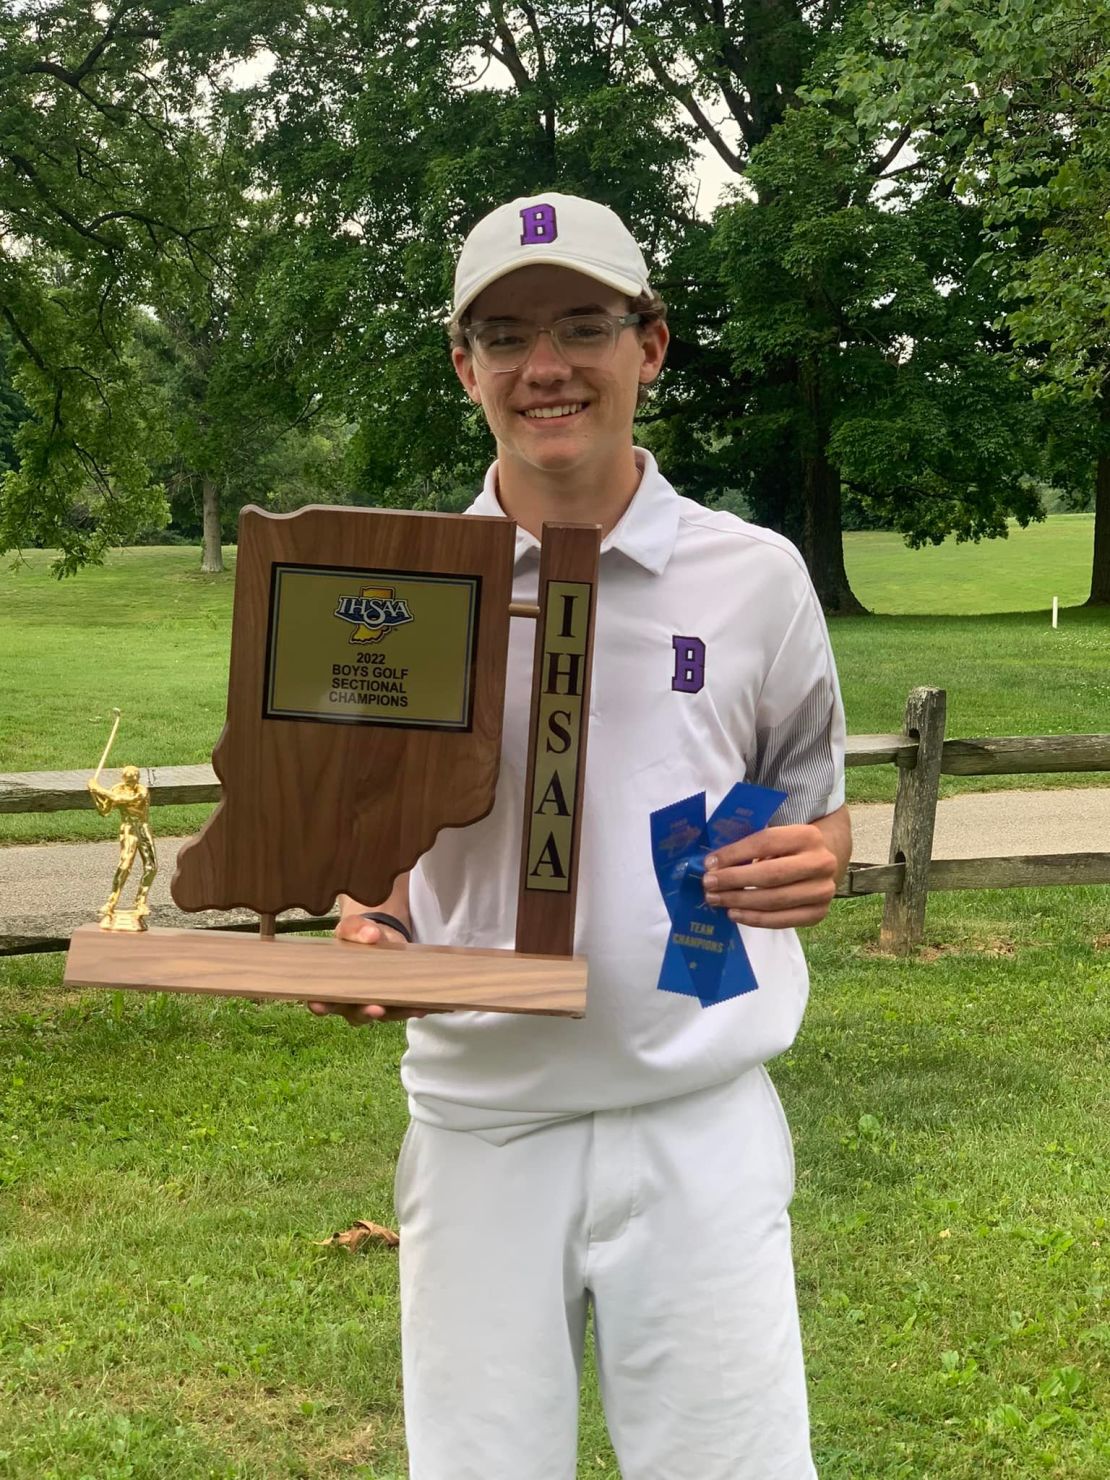 Gilmore celebrates his sectional title at the 2022 Indiana High School Athletic Association (IHSAA) state tournament.